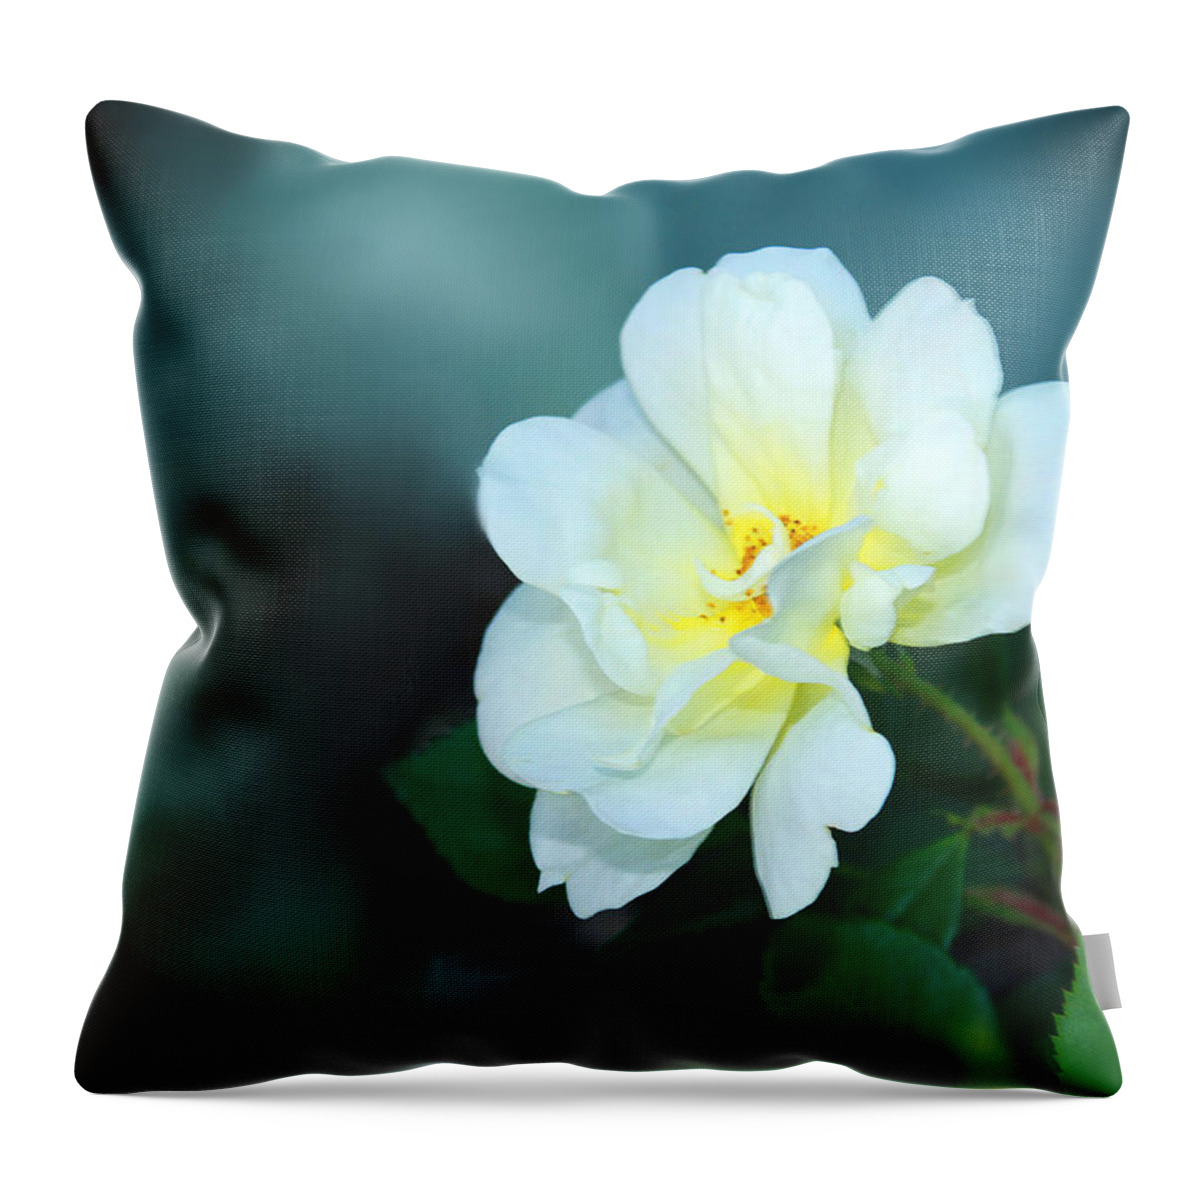 Flower Throw Pillow featuring the photograph Apple Blossom Time by Bonnie Willis